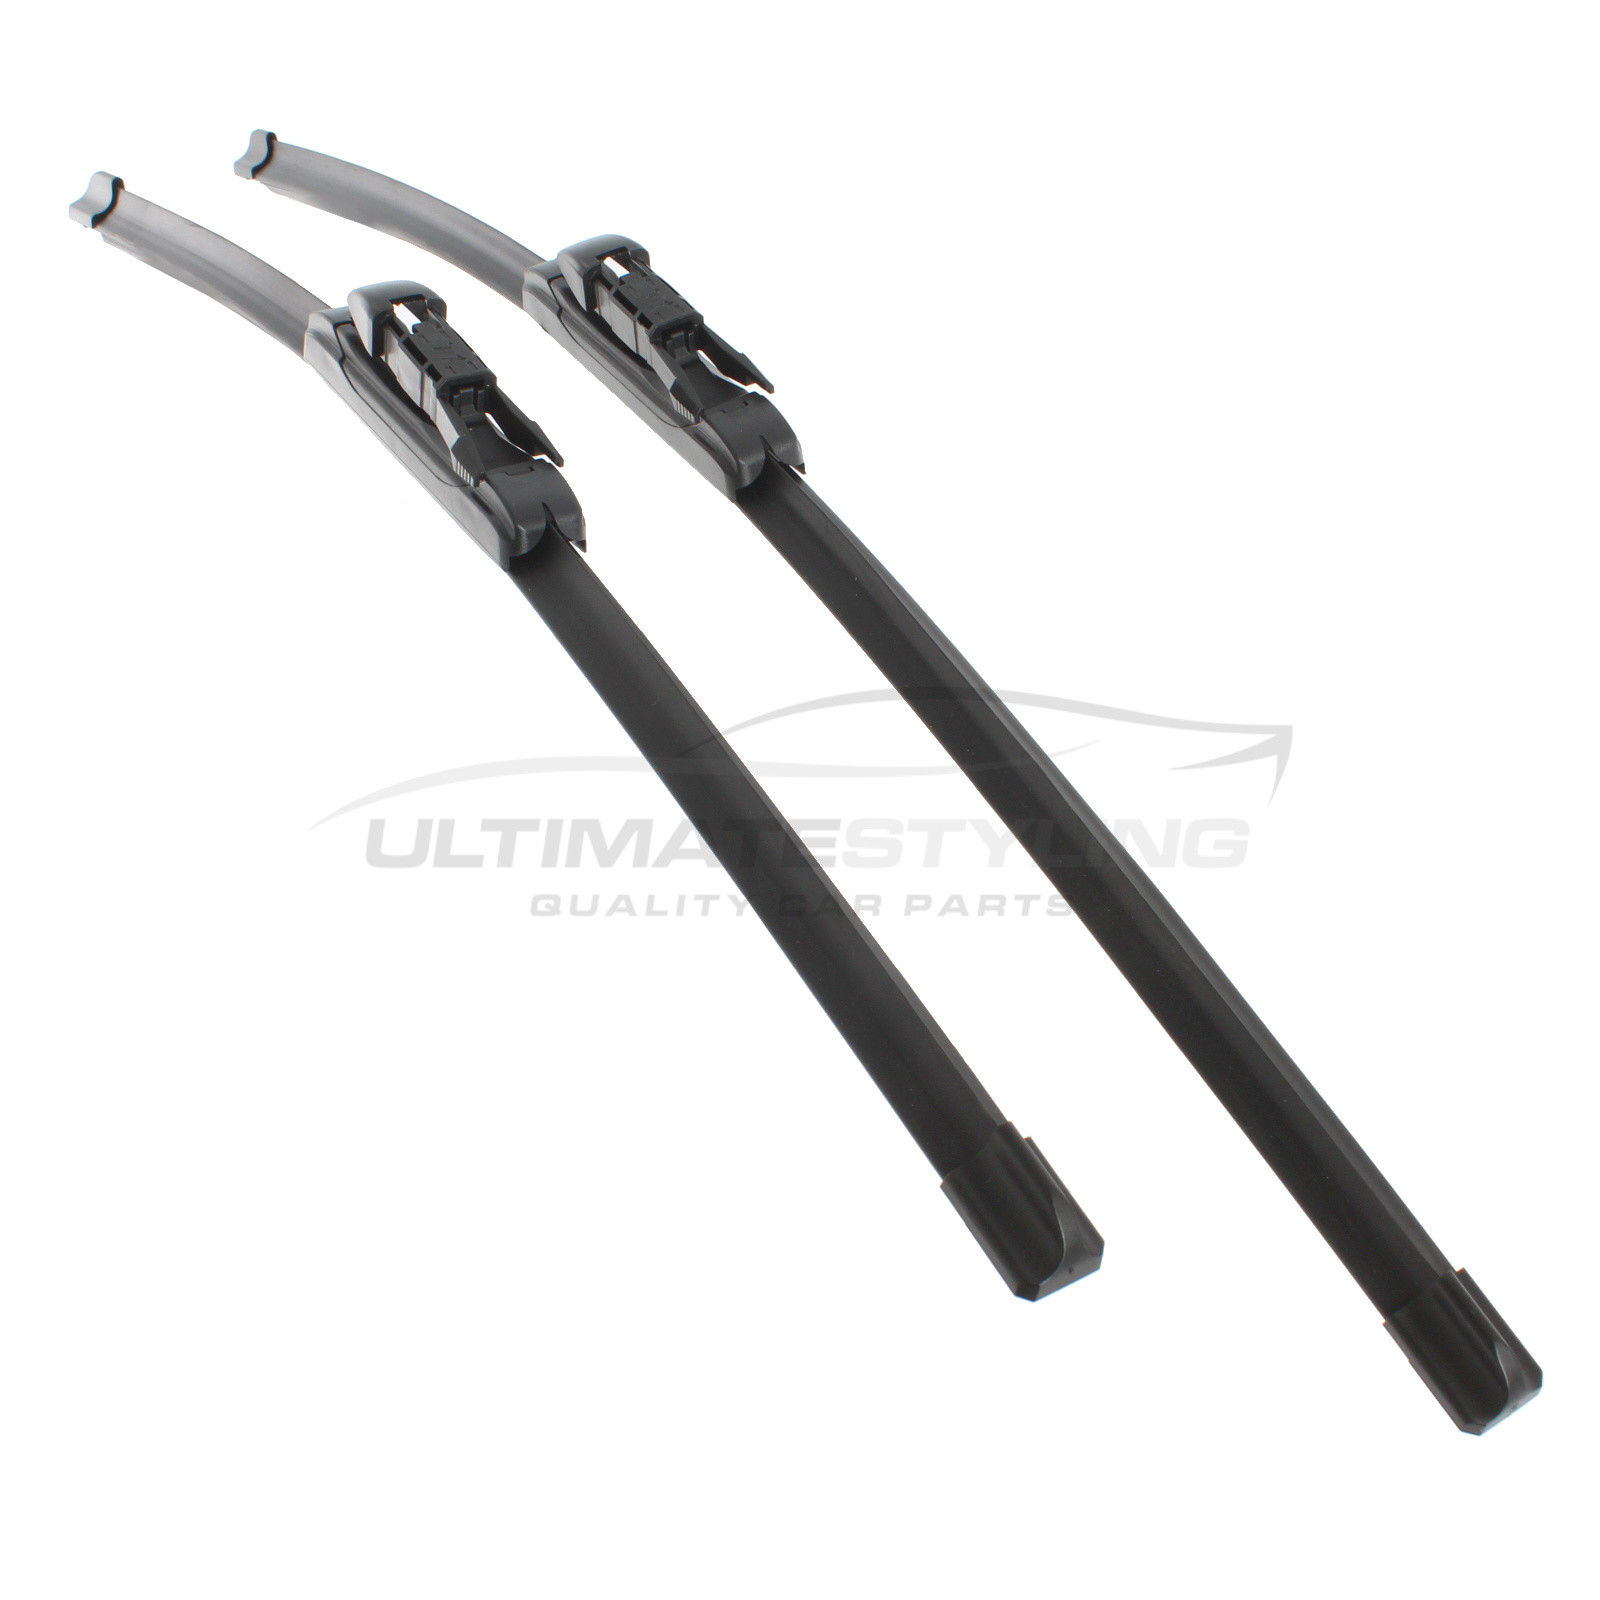 Drivers Side & Passenger Side (Front) Wiper Blades for Mercedes Benz CLA Class